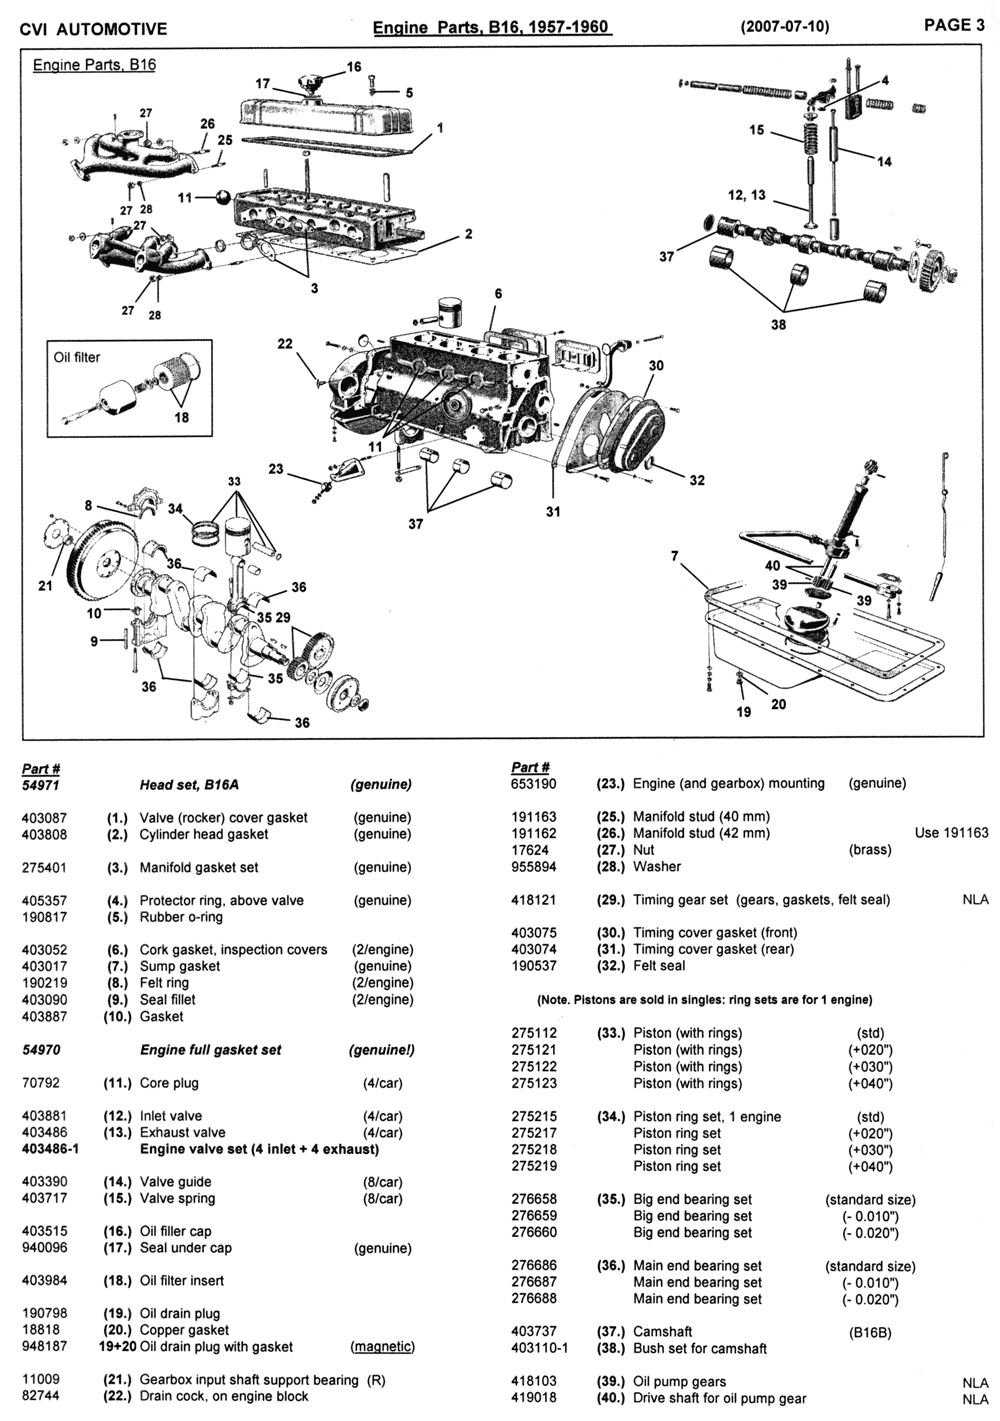 Exploded view over Amazon engine parts for B16